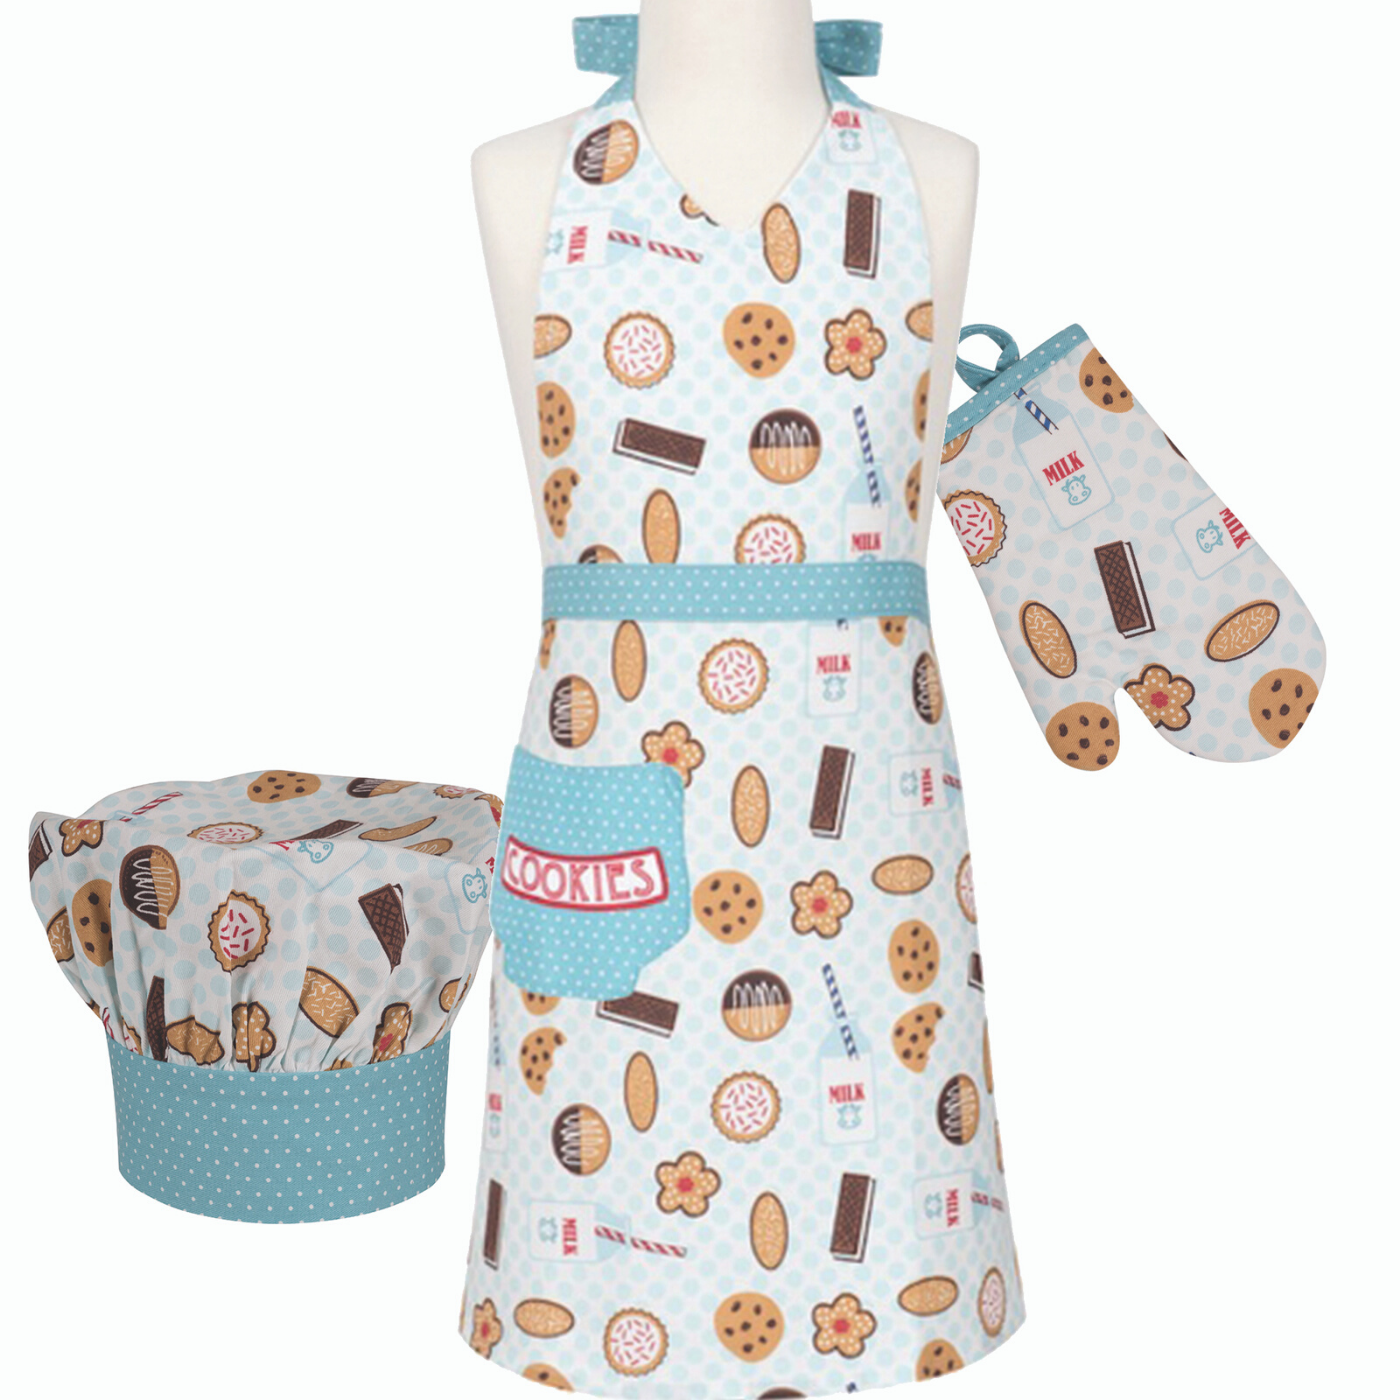  Handstand Kitchen Mother and Daughter Rainbows and Unicorns  100% Cotton Apron Set: Home & Kitchen